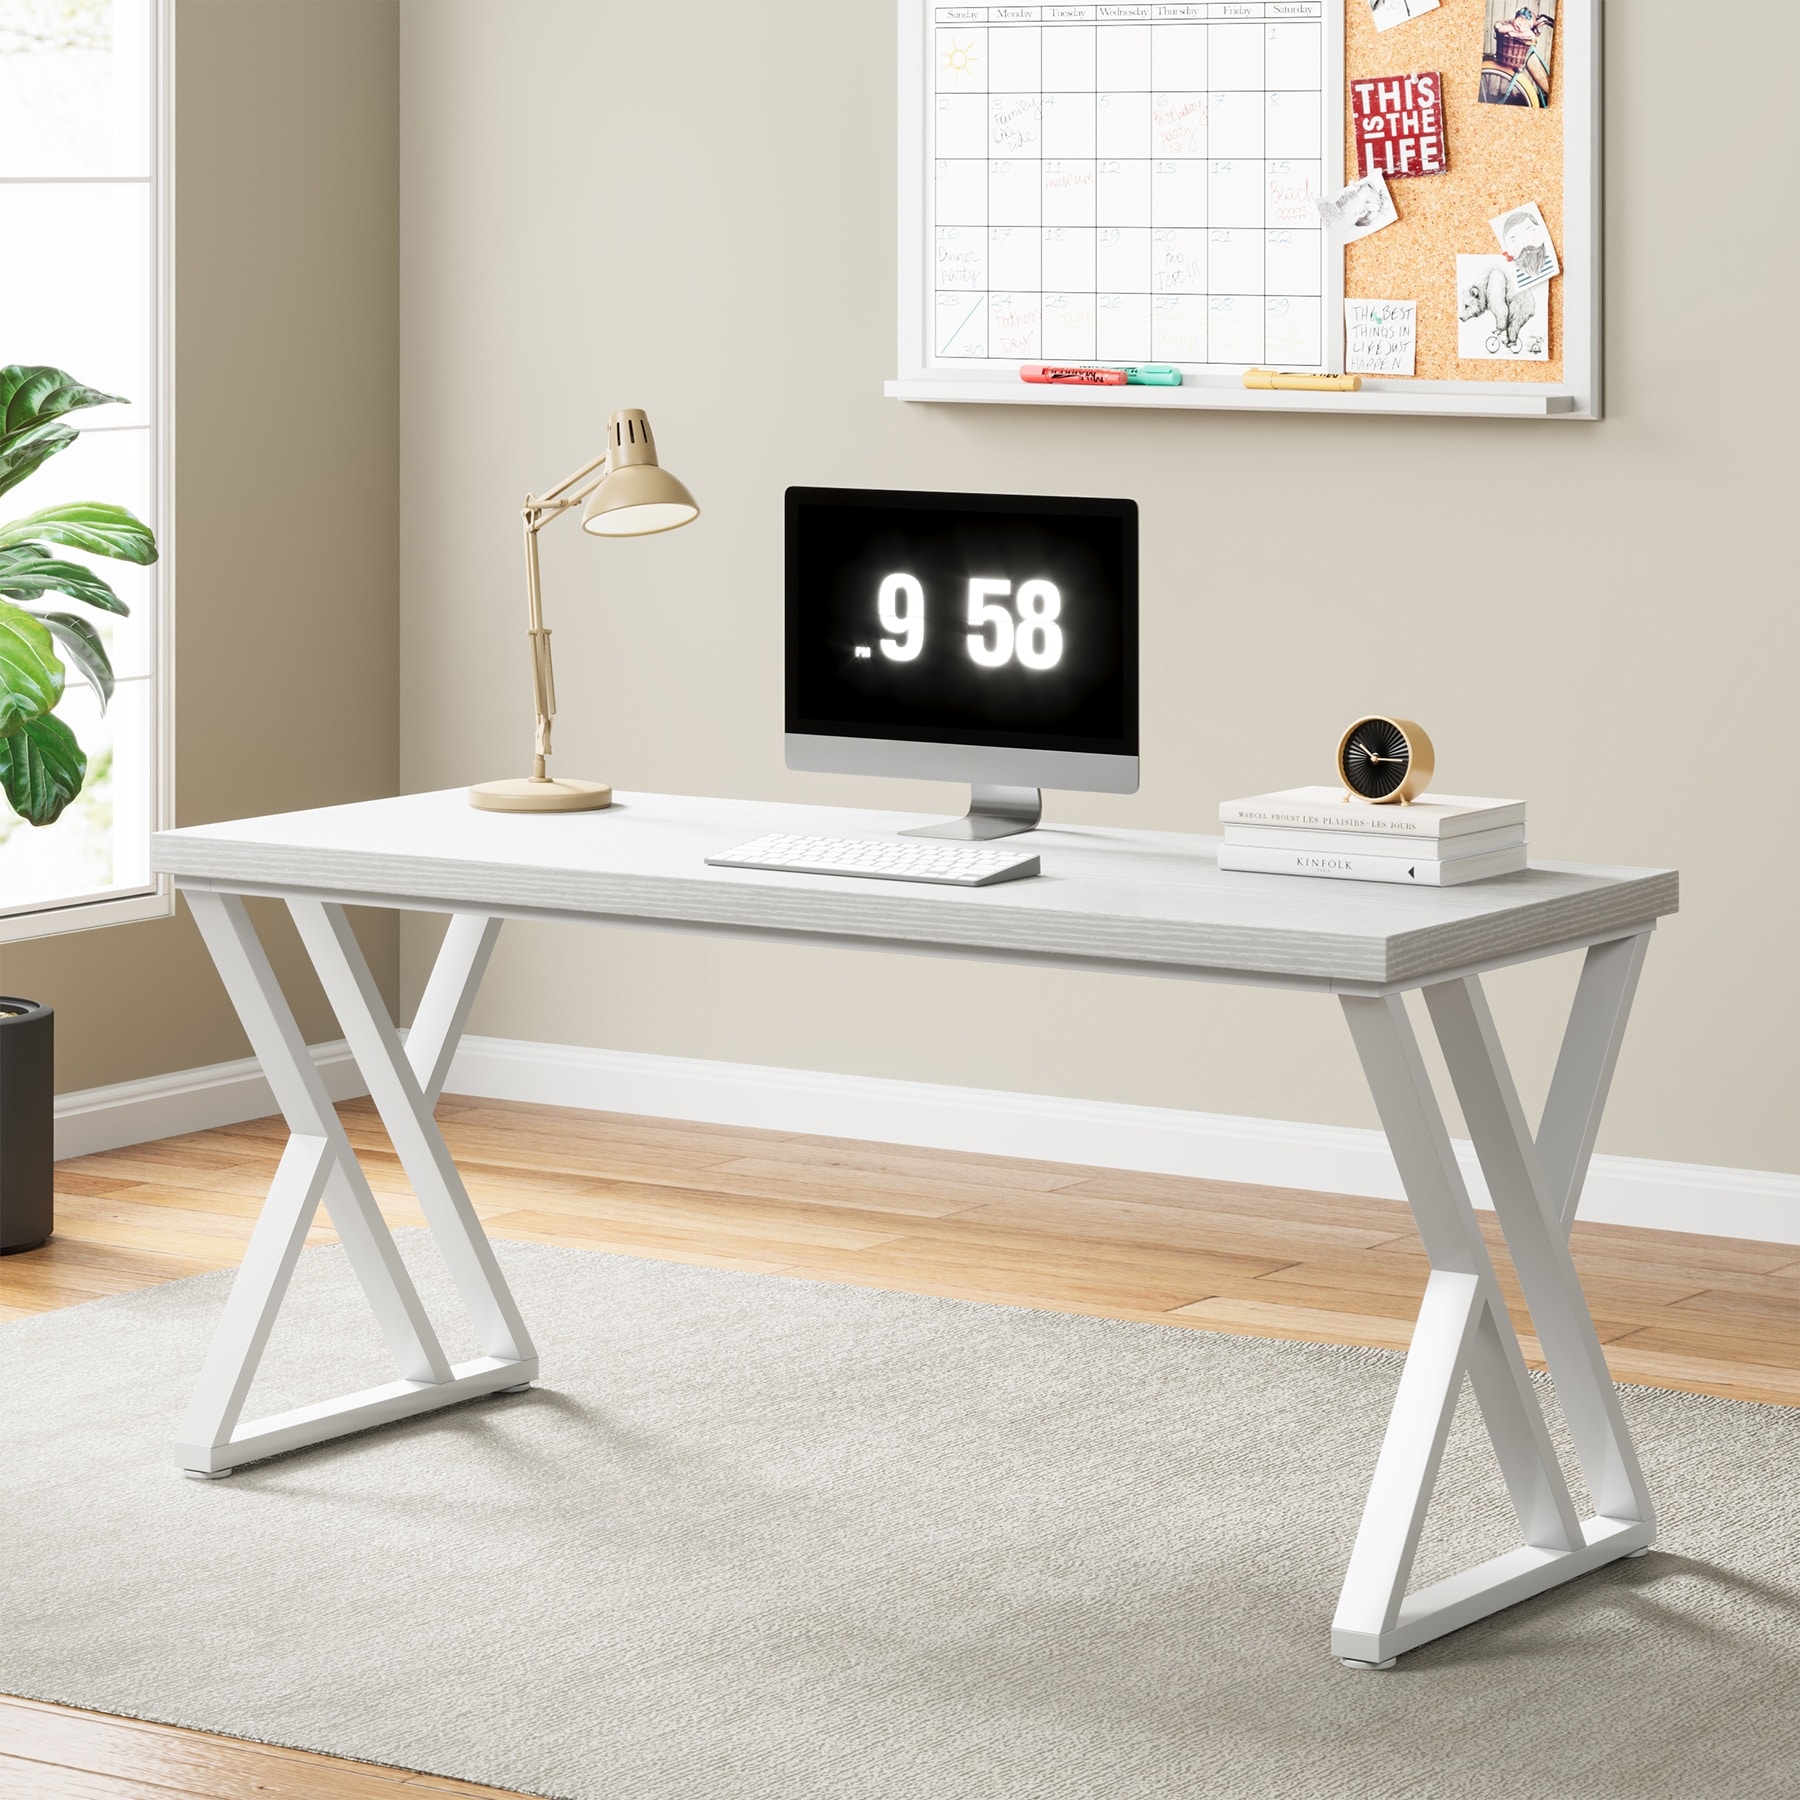  Tribesigns Computer Desk, 55 inch Large Office Desk Computer  Table Study Writing Desk for Home Office, White + White Leg : Home & Kitchen